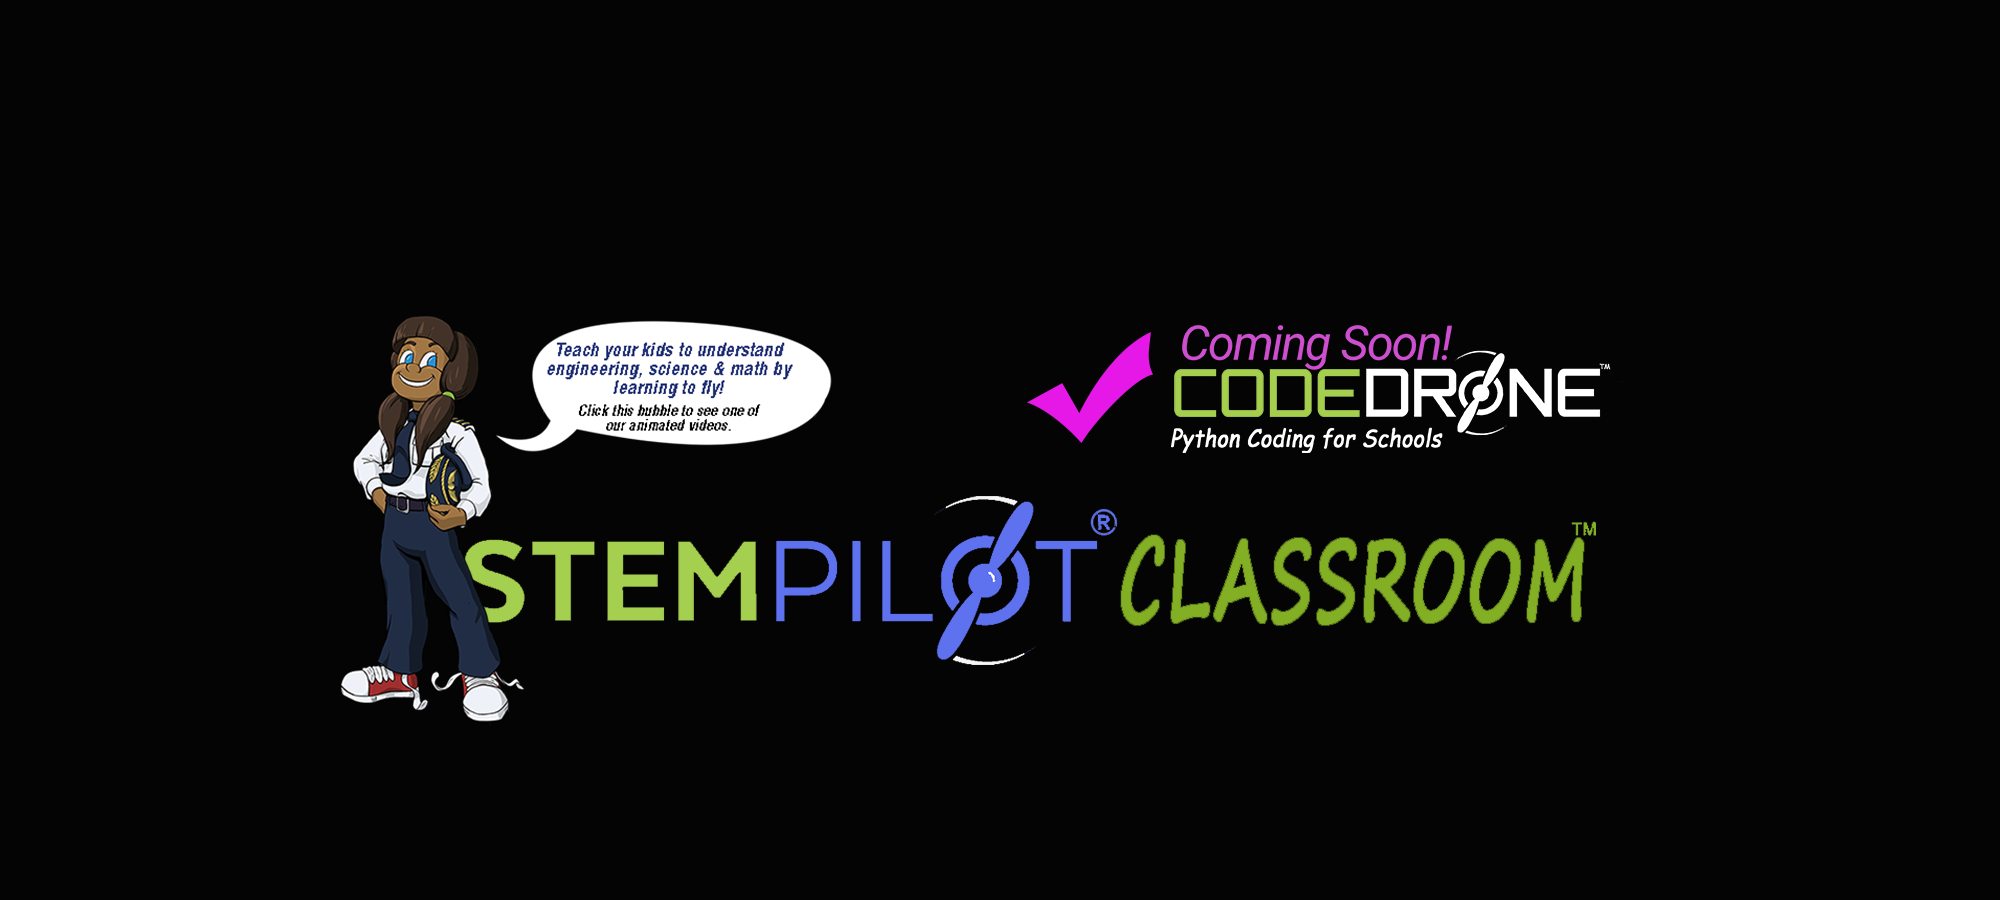 Code Drone for STEMPilot Classroom